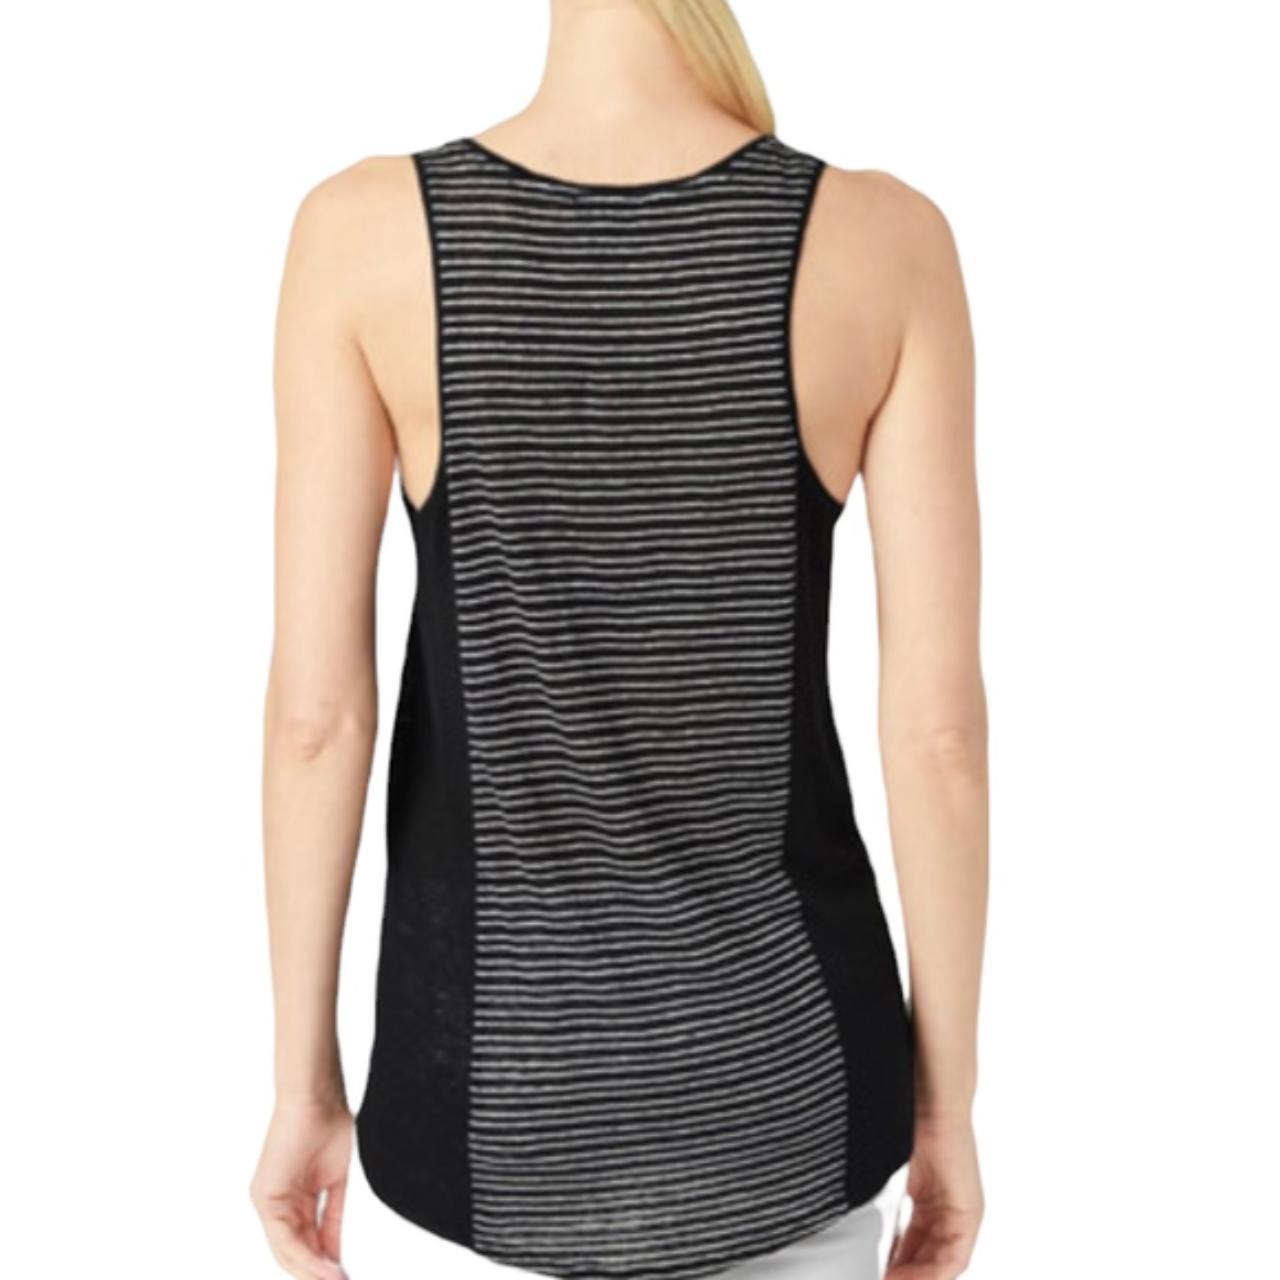 PAIGE Women's Black and White Vests-tanks-camis